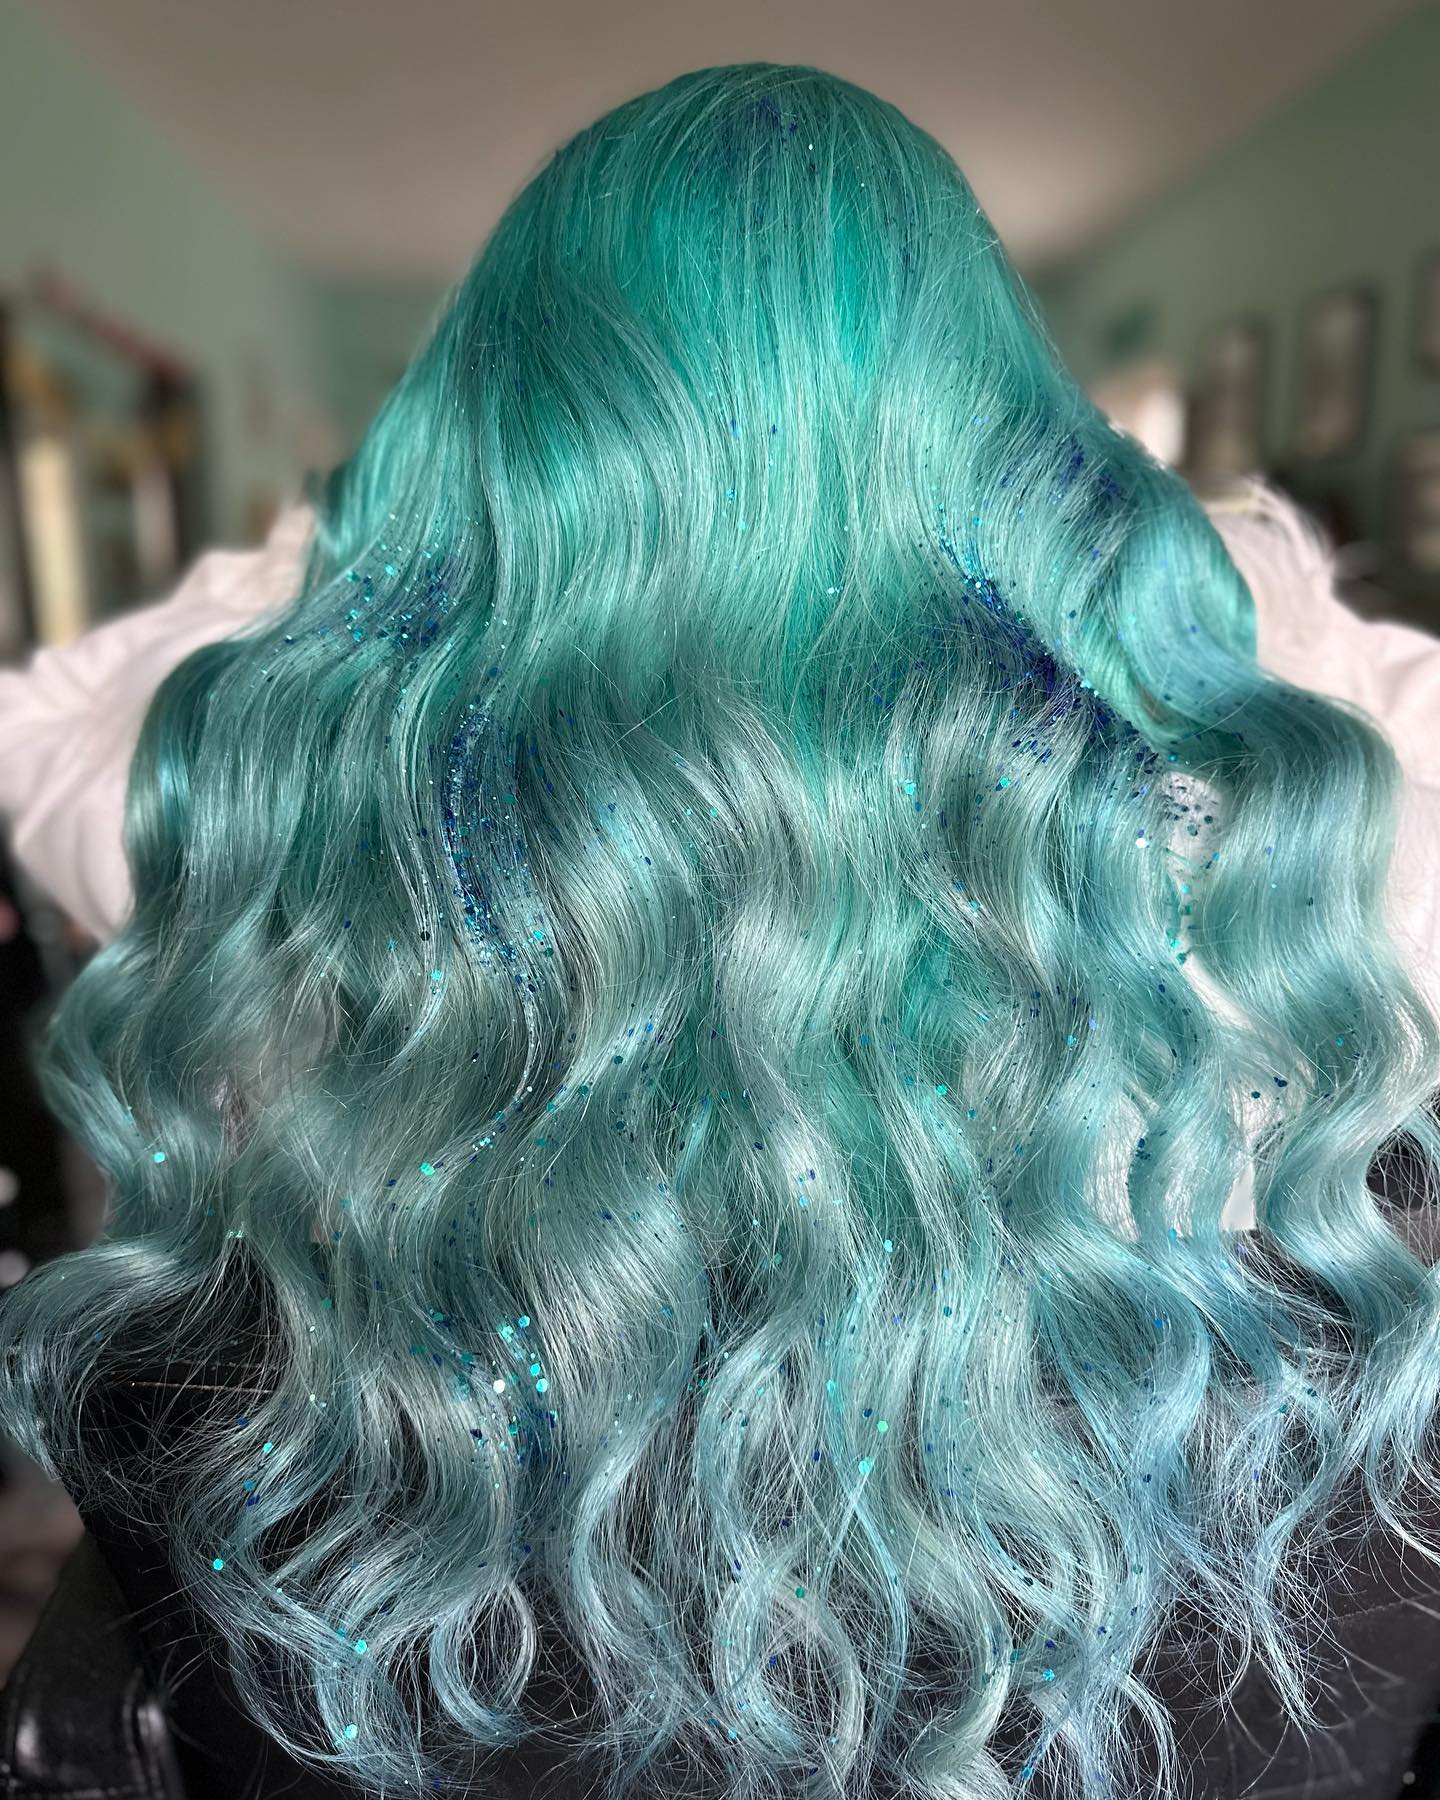 Long Wavy Hair with Green to Pastel Turquoise Shades